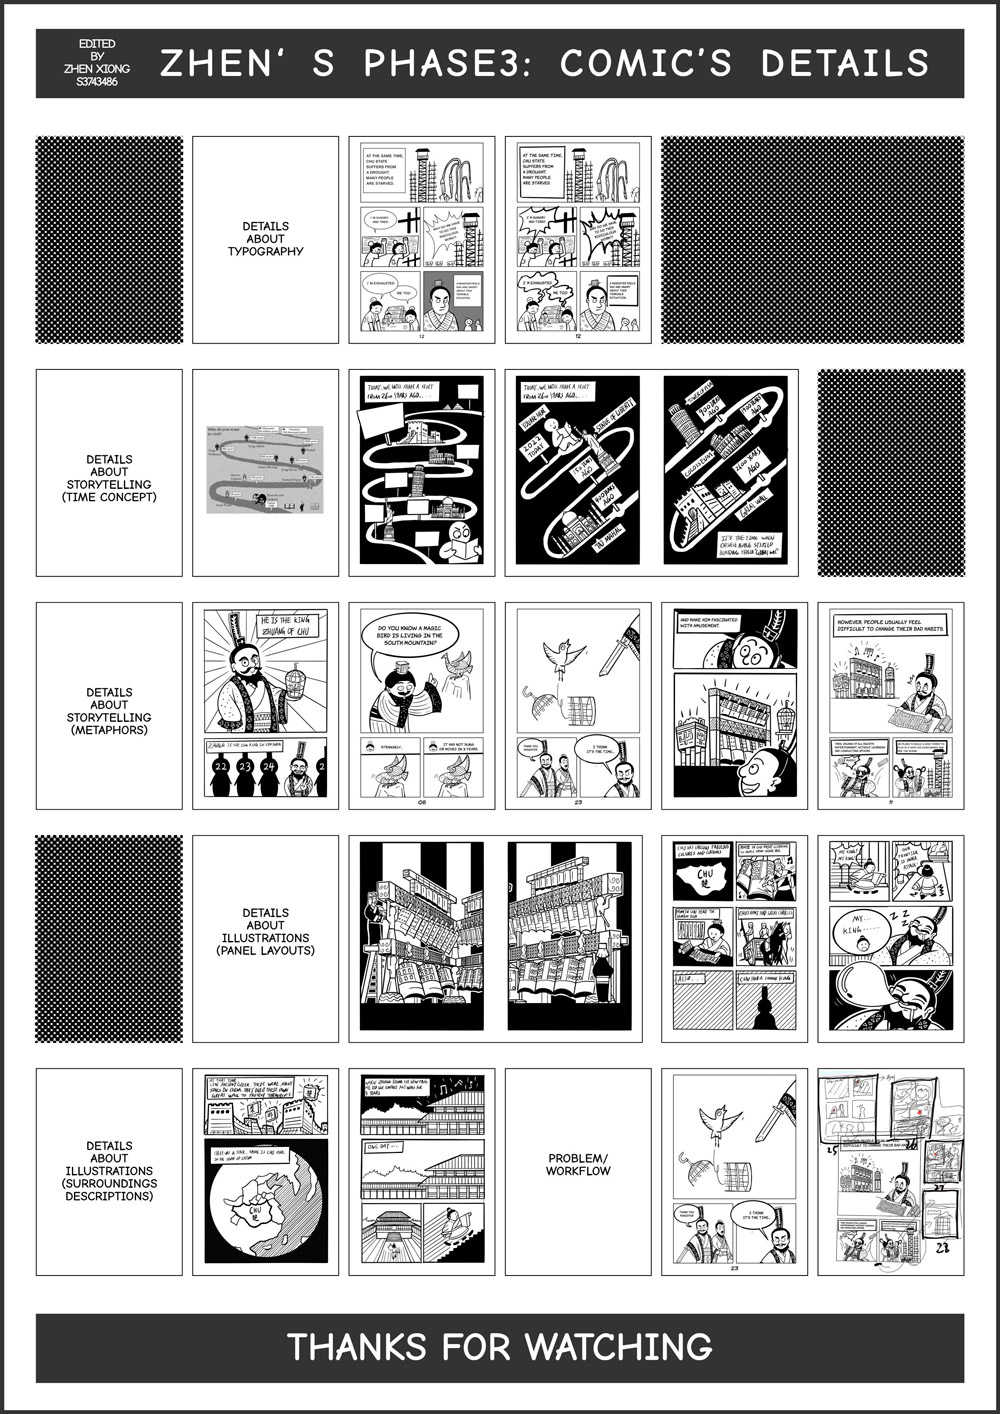 The purpose of this phase was to modify the comic's details and reflect on the workflow. This phase revealed that the combination of panels, comic font, and storytelling could influence readers' emotions. The relevant relics could be edited to be part of the storytelling to increase their appearance in the comic. The comic's aesthetic should be consistent. The font and illustration's style should be similar. Designing the panels and page layout should be simultaneous.